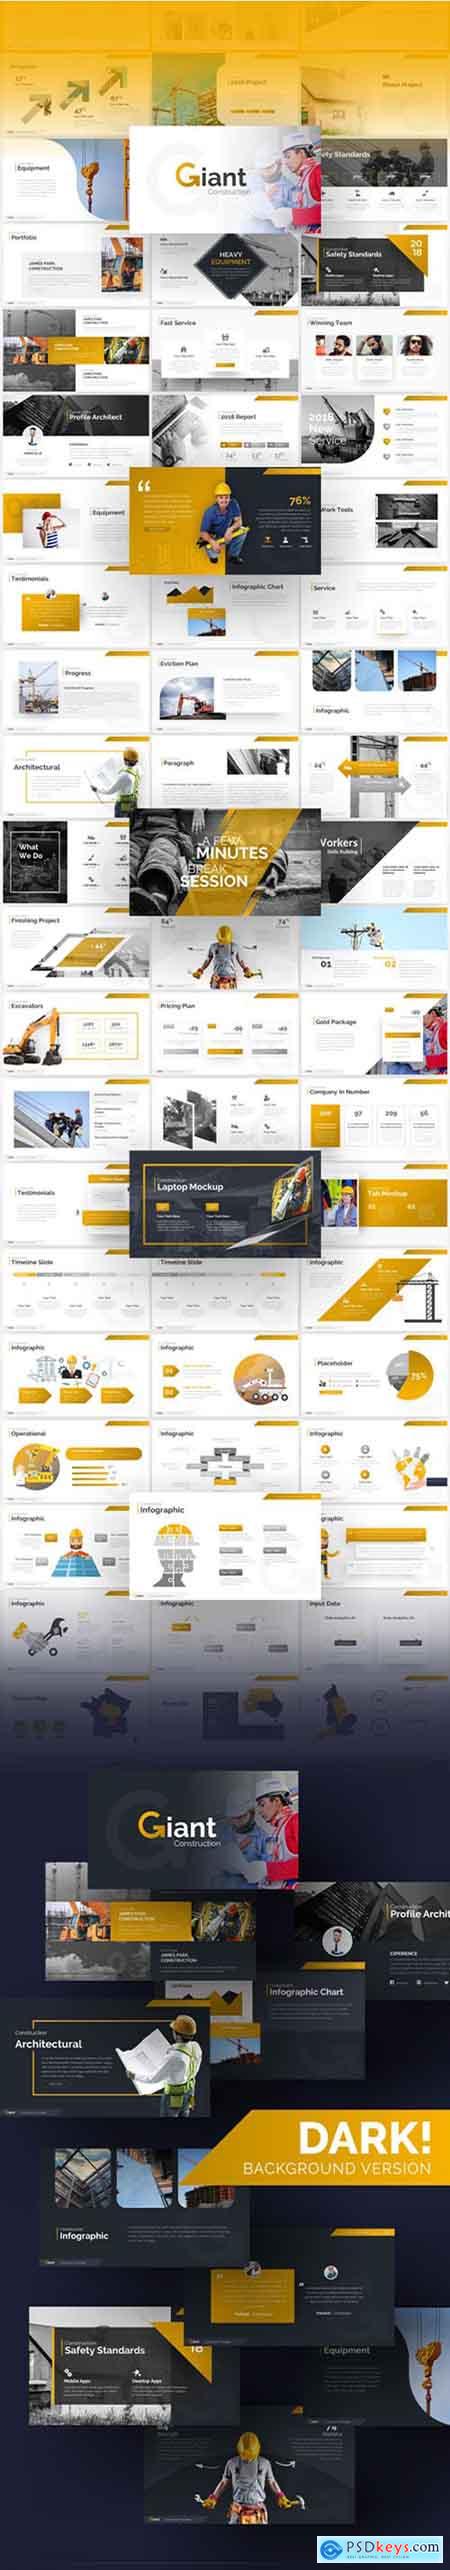 Graphicriver Giant Construction PowerPoint Presentation Template